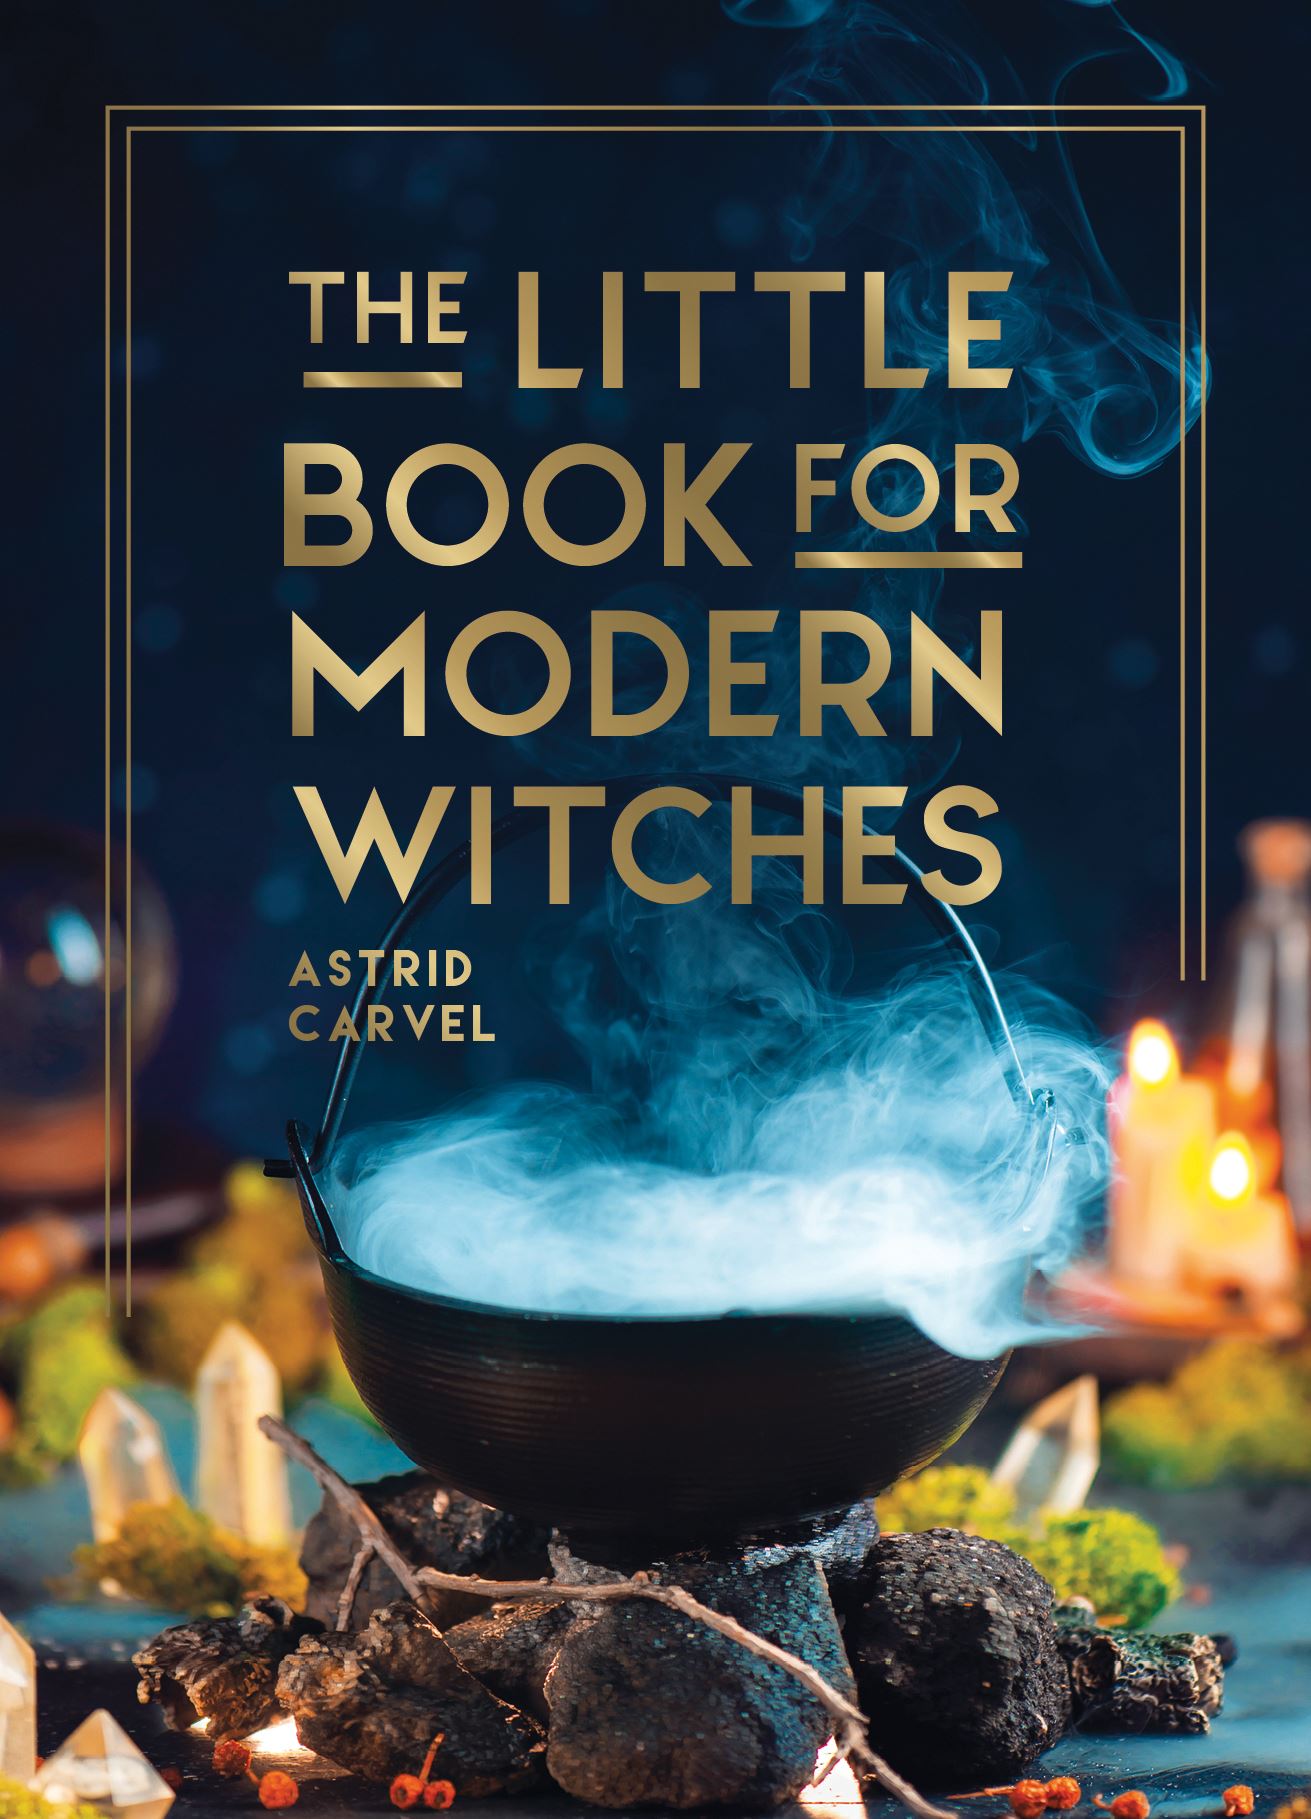 LITTLE BOOK FOR MODERN WITCHES